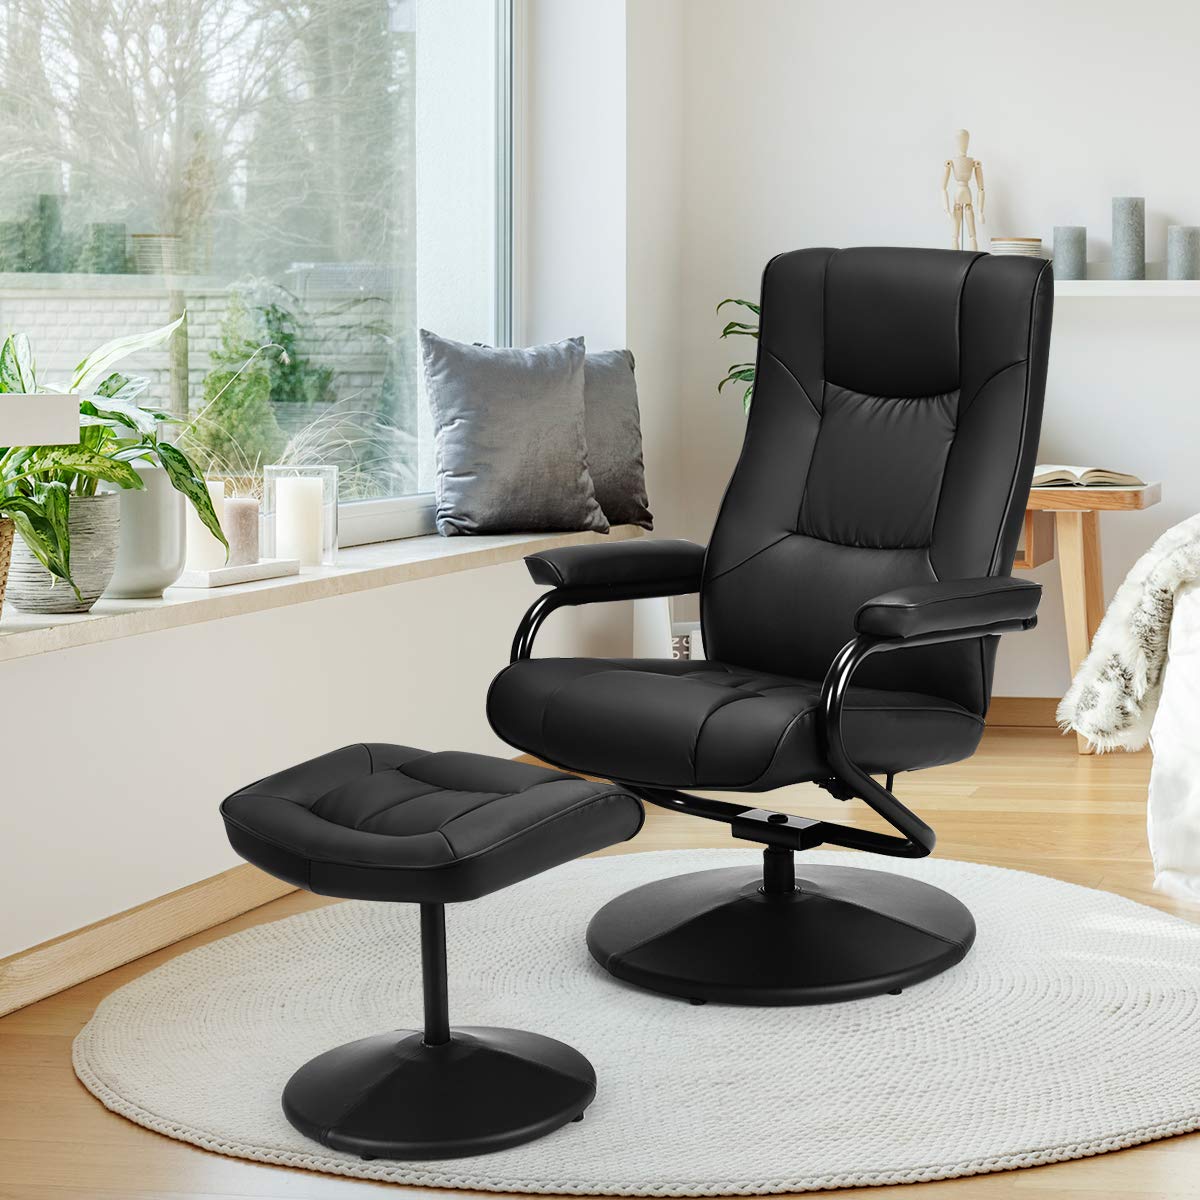 Giantex Recliner Chair with Ottoman, 360 Degree Swivel Leather Reclining Chair with Stable Steel Base